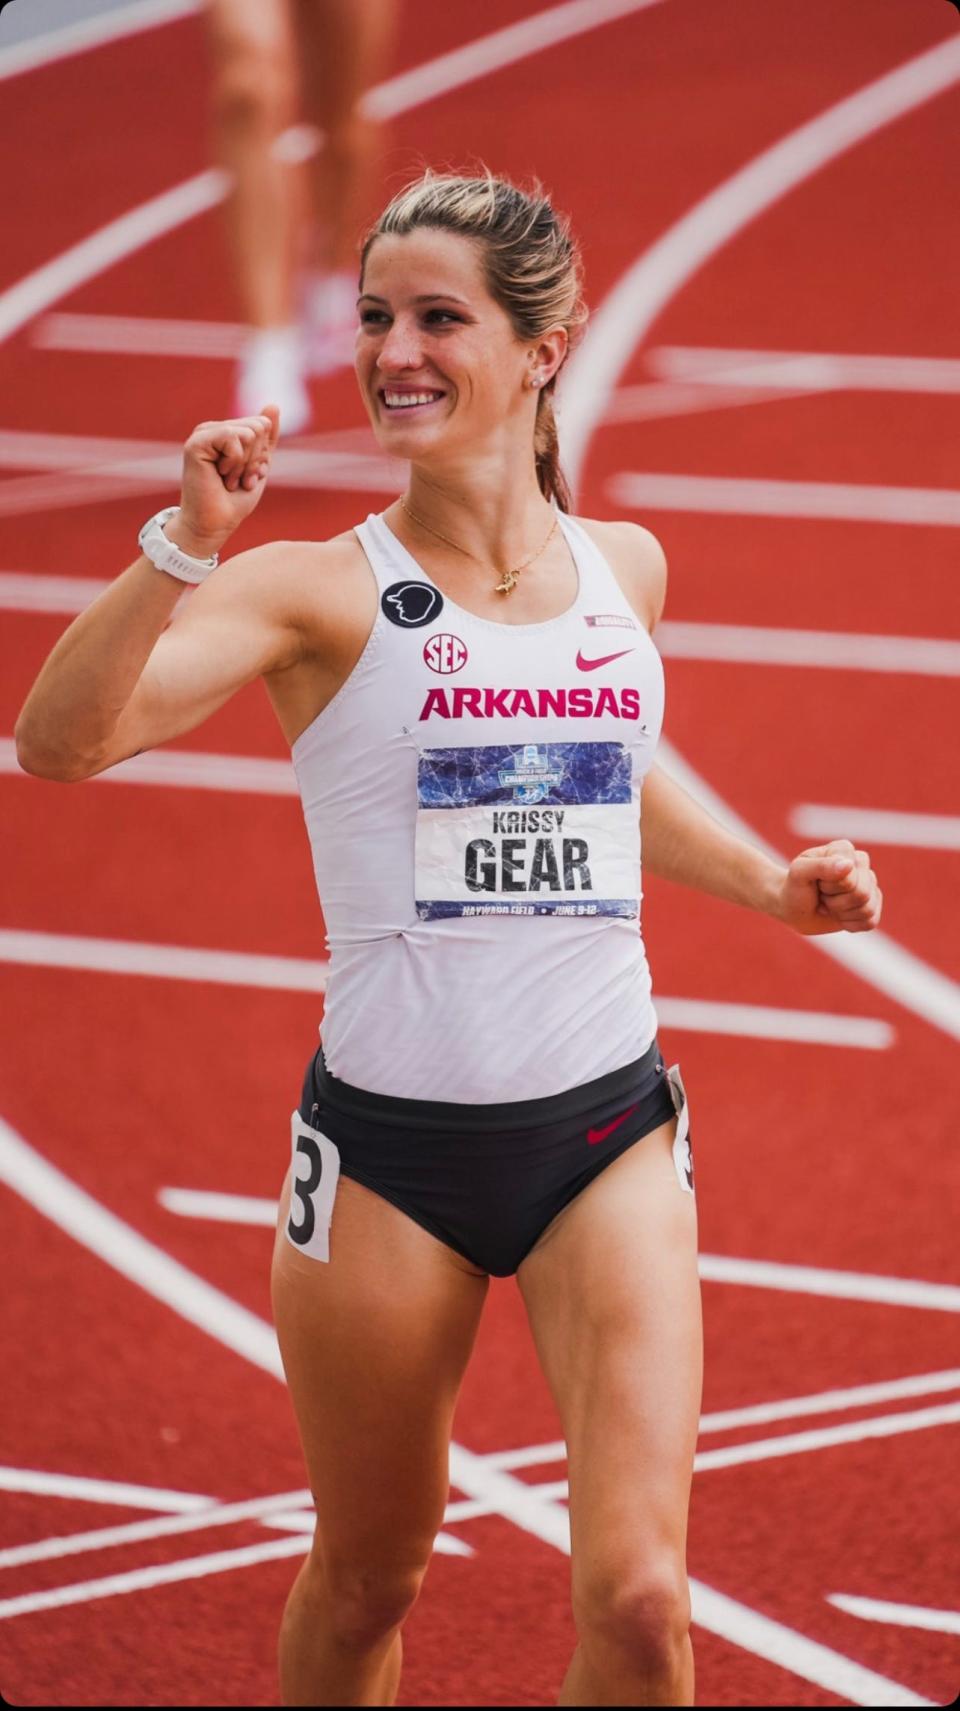 Arkansas runner and Fort Myers alum Krissy Gear is all smiles at the NCAA National Championships in Eugene, Ore. on Saturday, June 12, 2021.